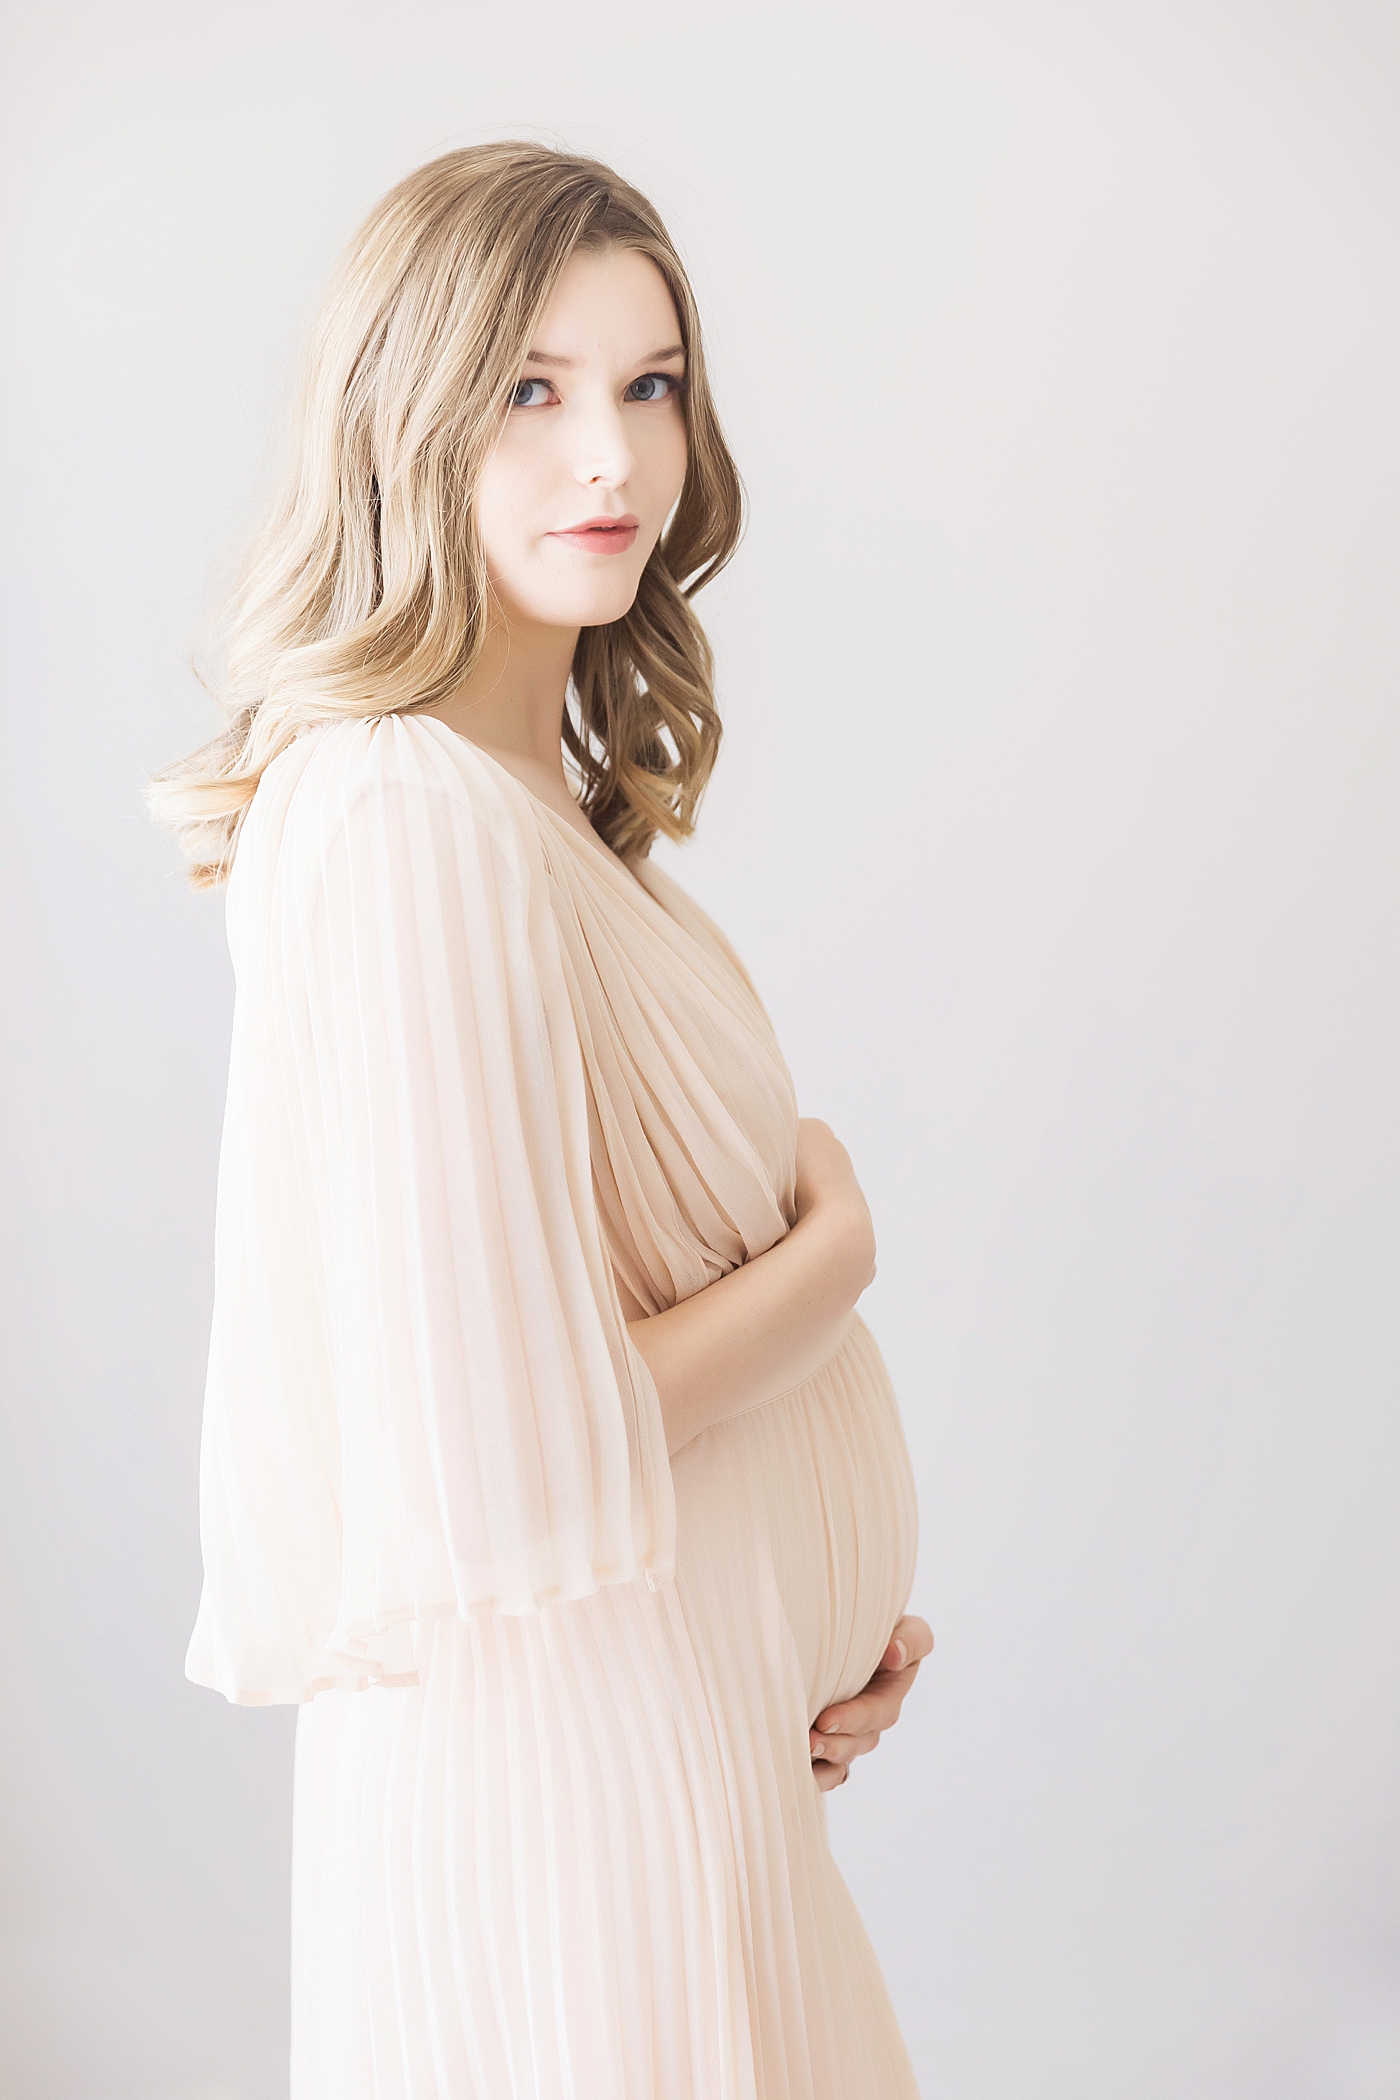 Expecting mom in beautiful dress. Photo by Fresh Light Photography.